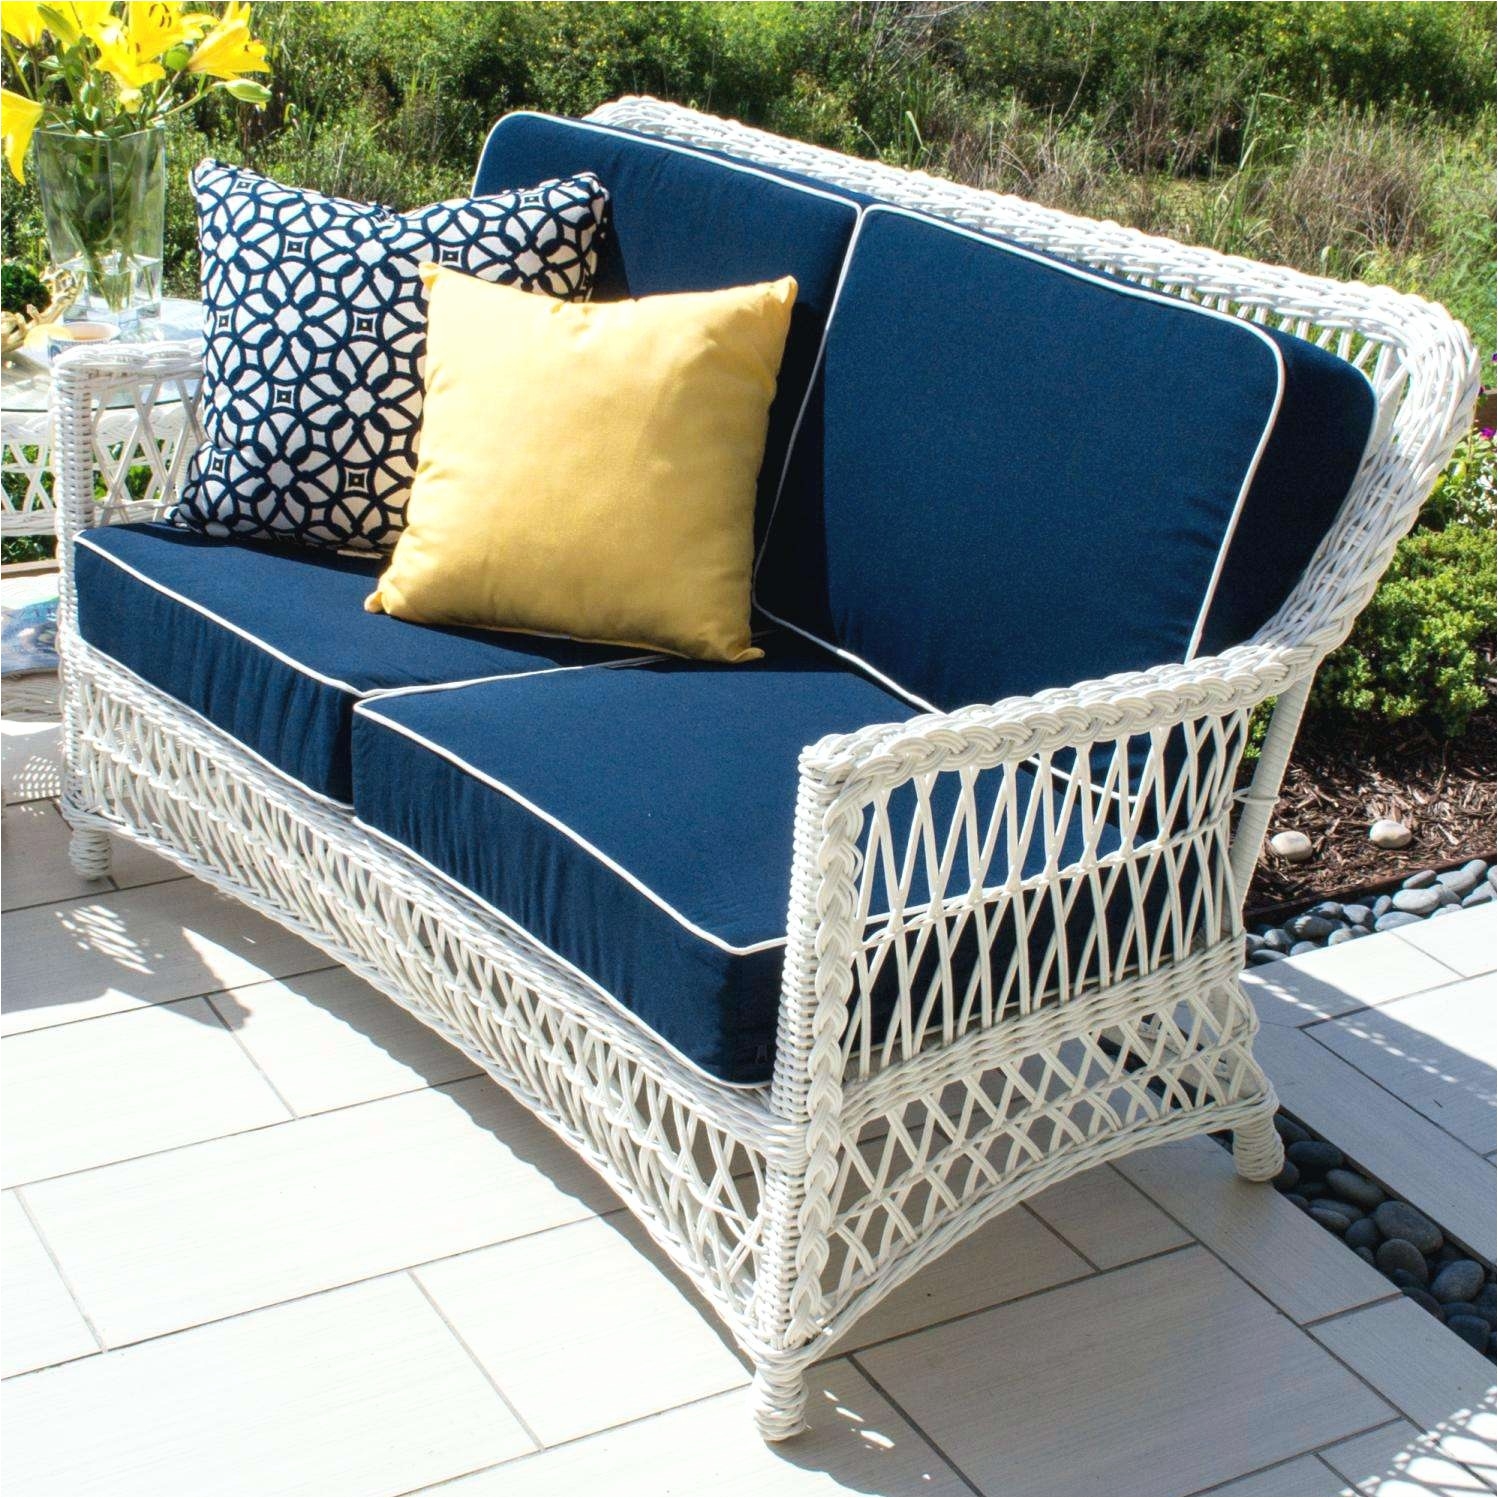 garden flag post better wicker outdoor sofa 0d patio chairs sale replacement cushions design image of